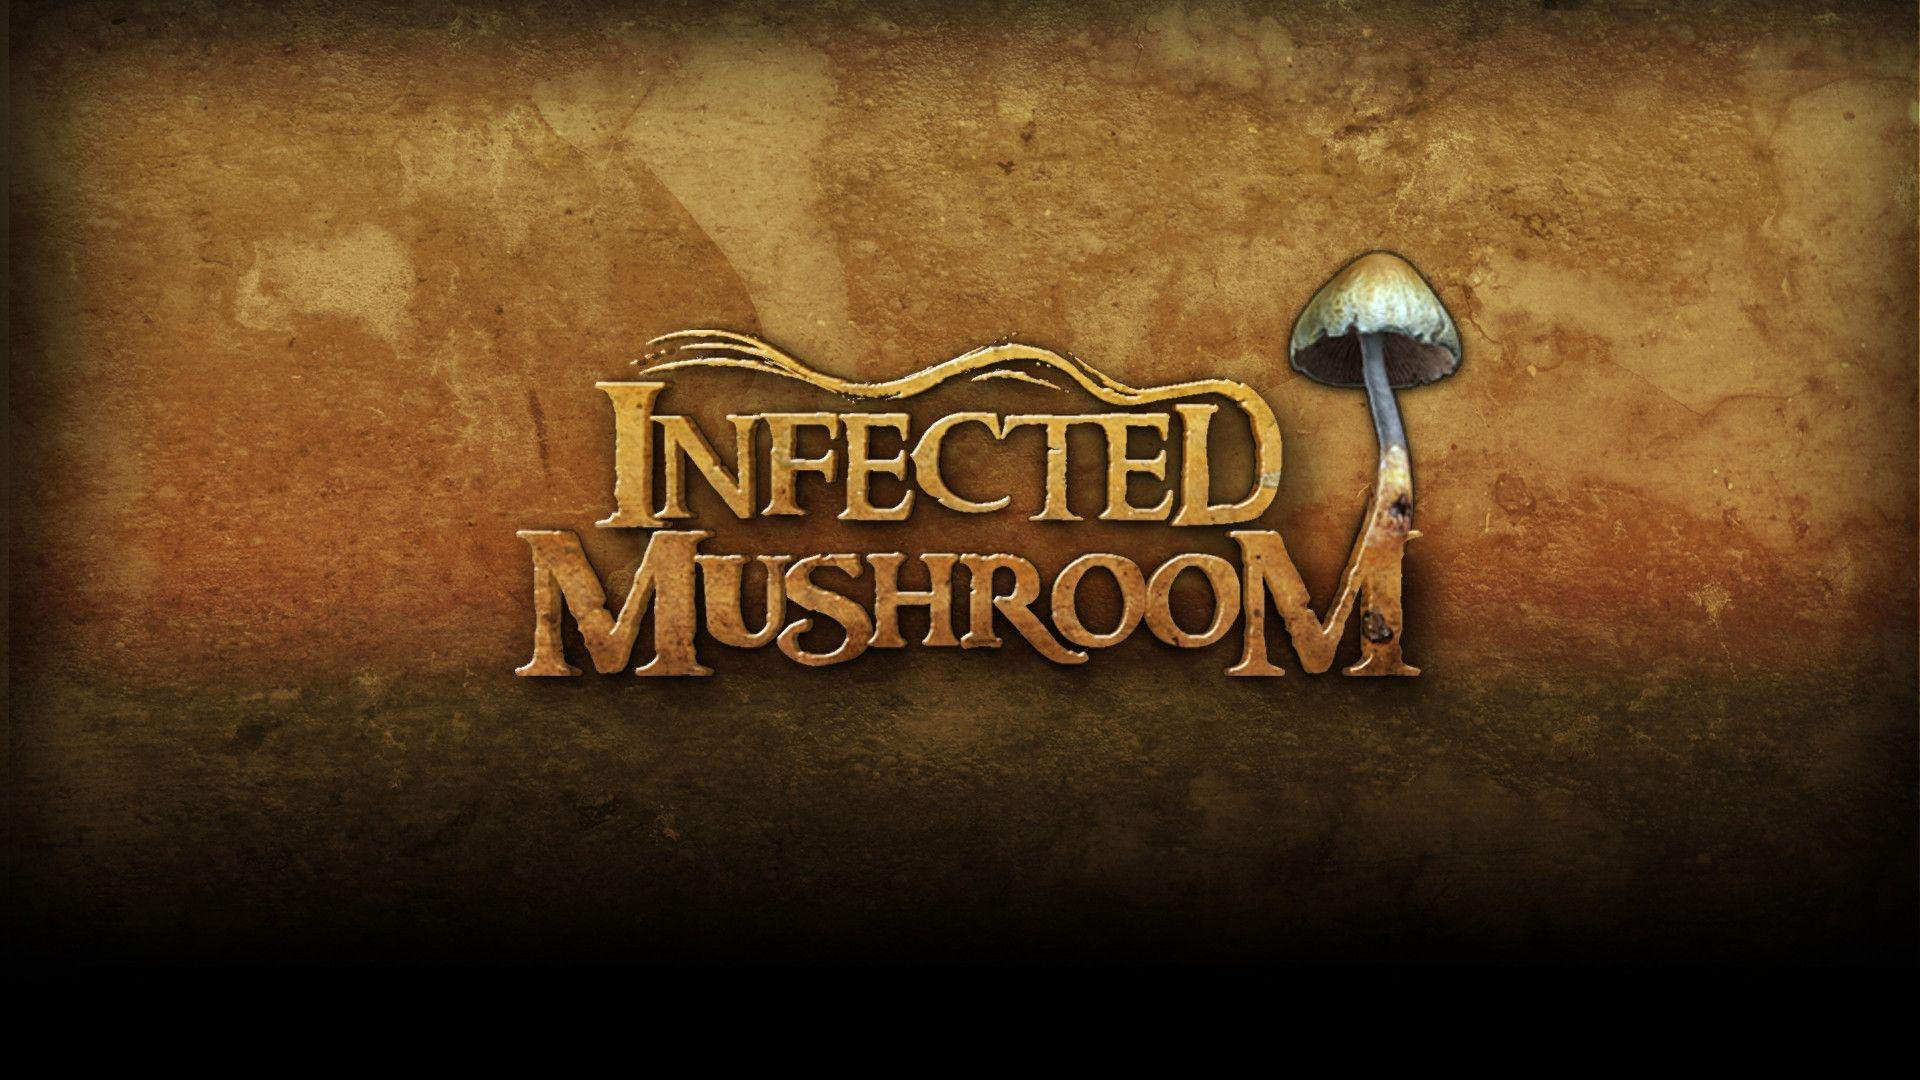 Infected Mushroom Letters Background Wallpaper 1920x1080 px Free